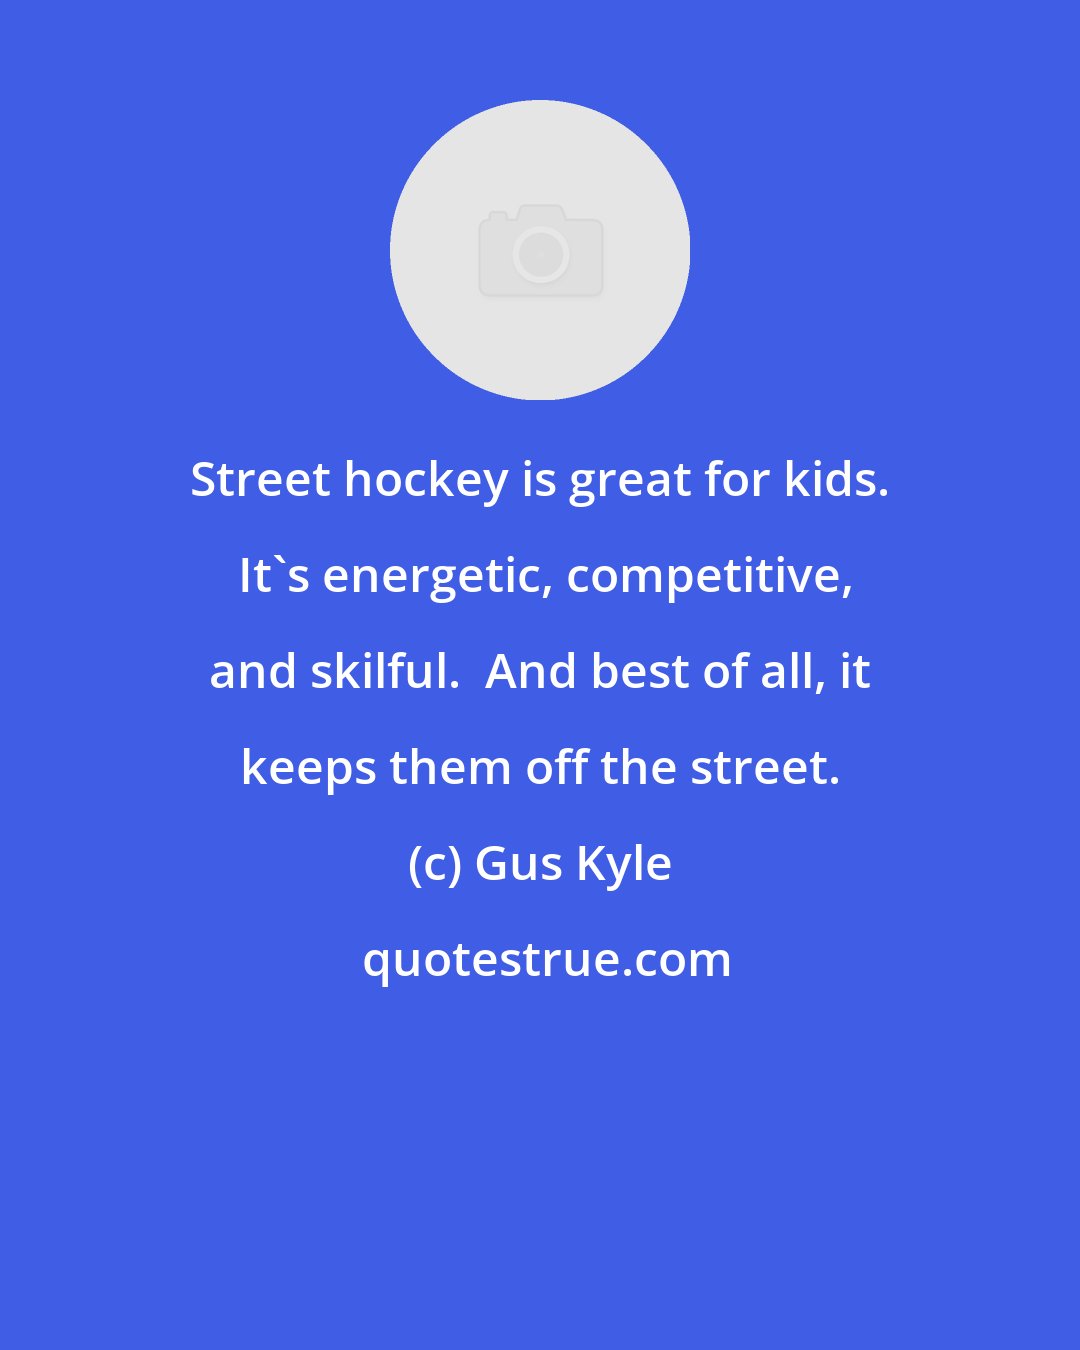 Gus Kyle: Street hockey is great for kids.  It's energetic, competitive, and skilful.  And best of all, it keeps them off the street.